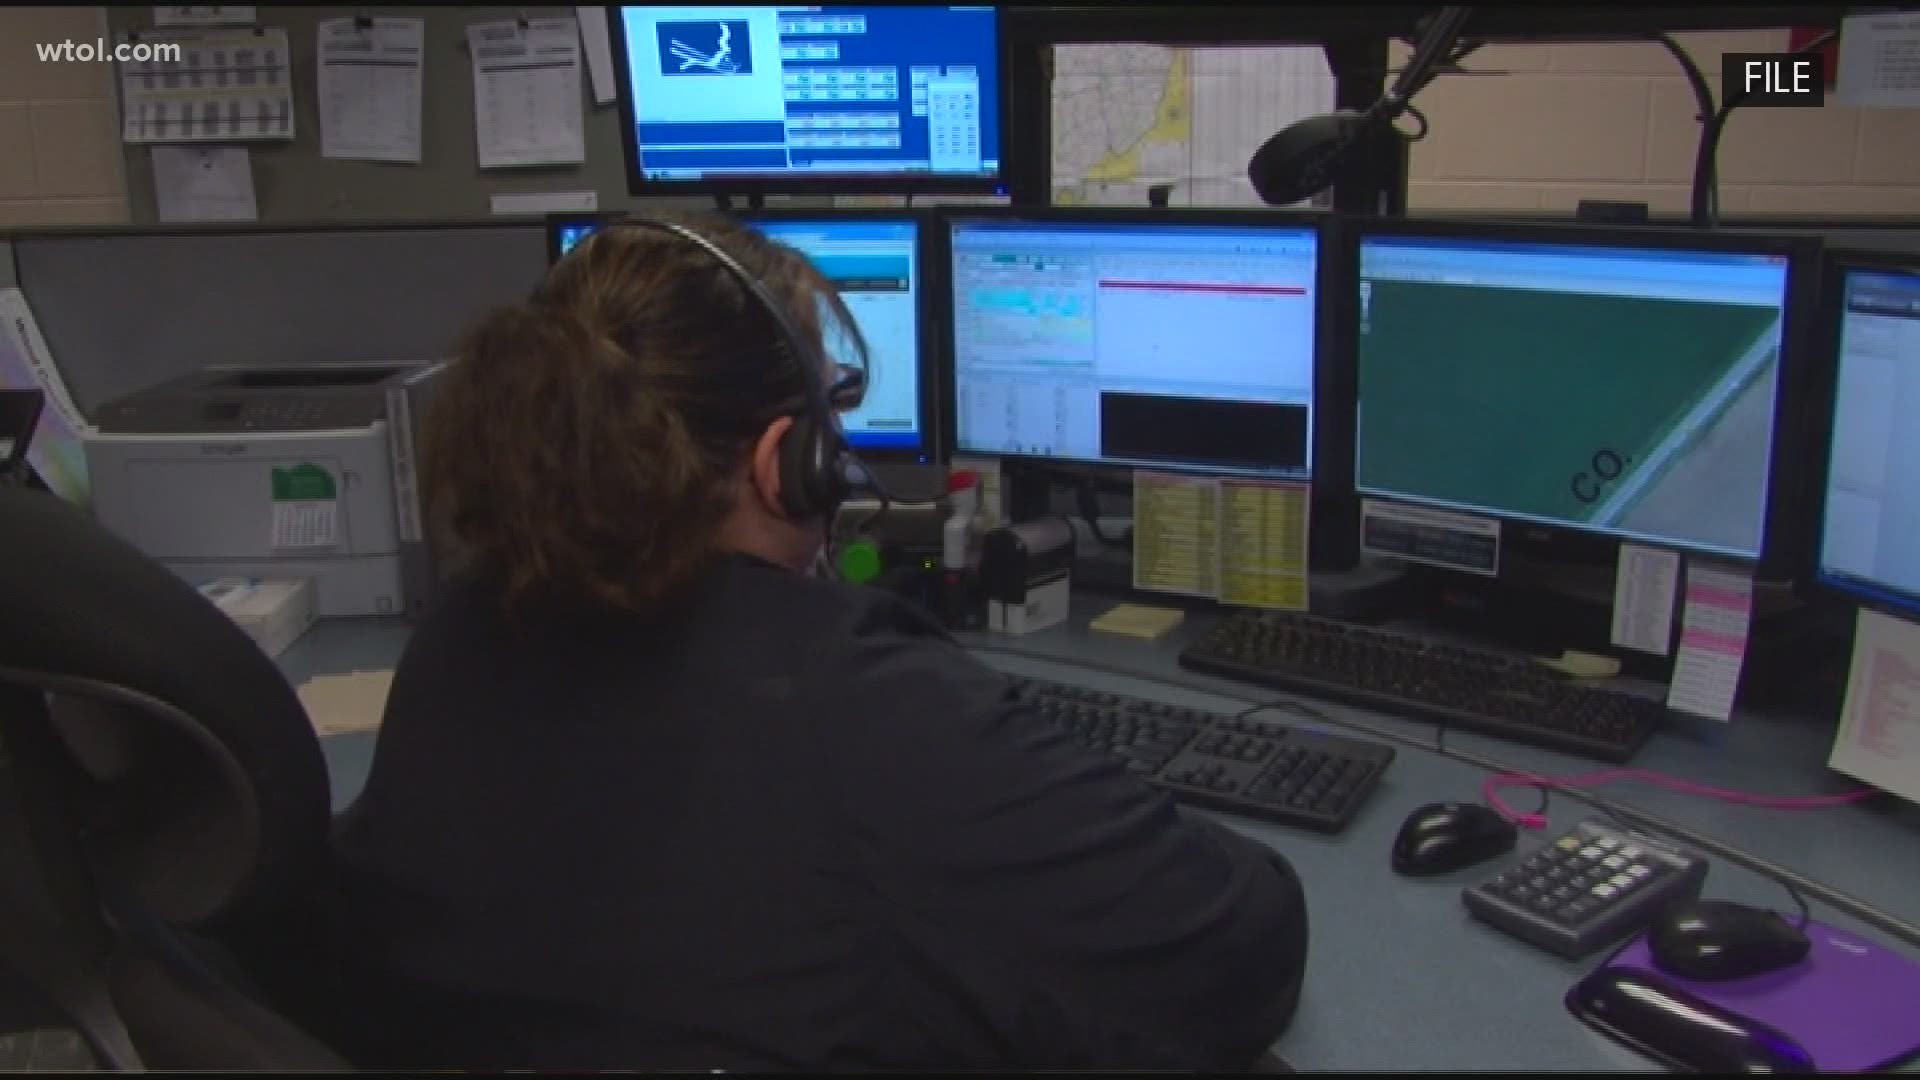 The FCC program connects to 911 dispatch from any cellular phone service provider through text